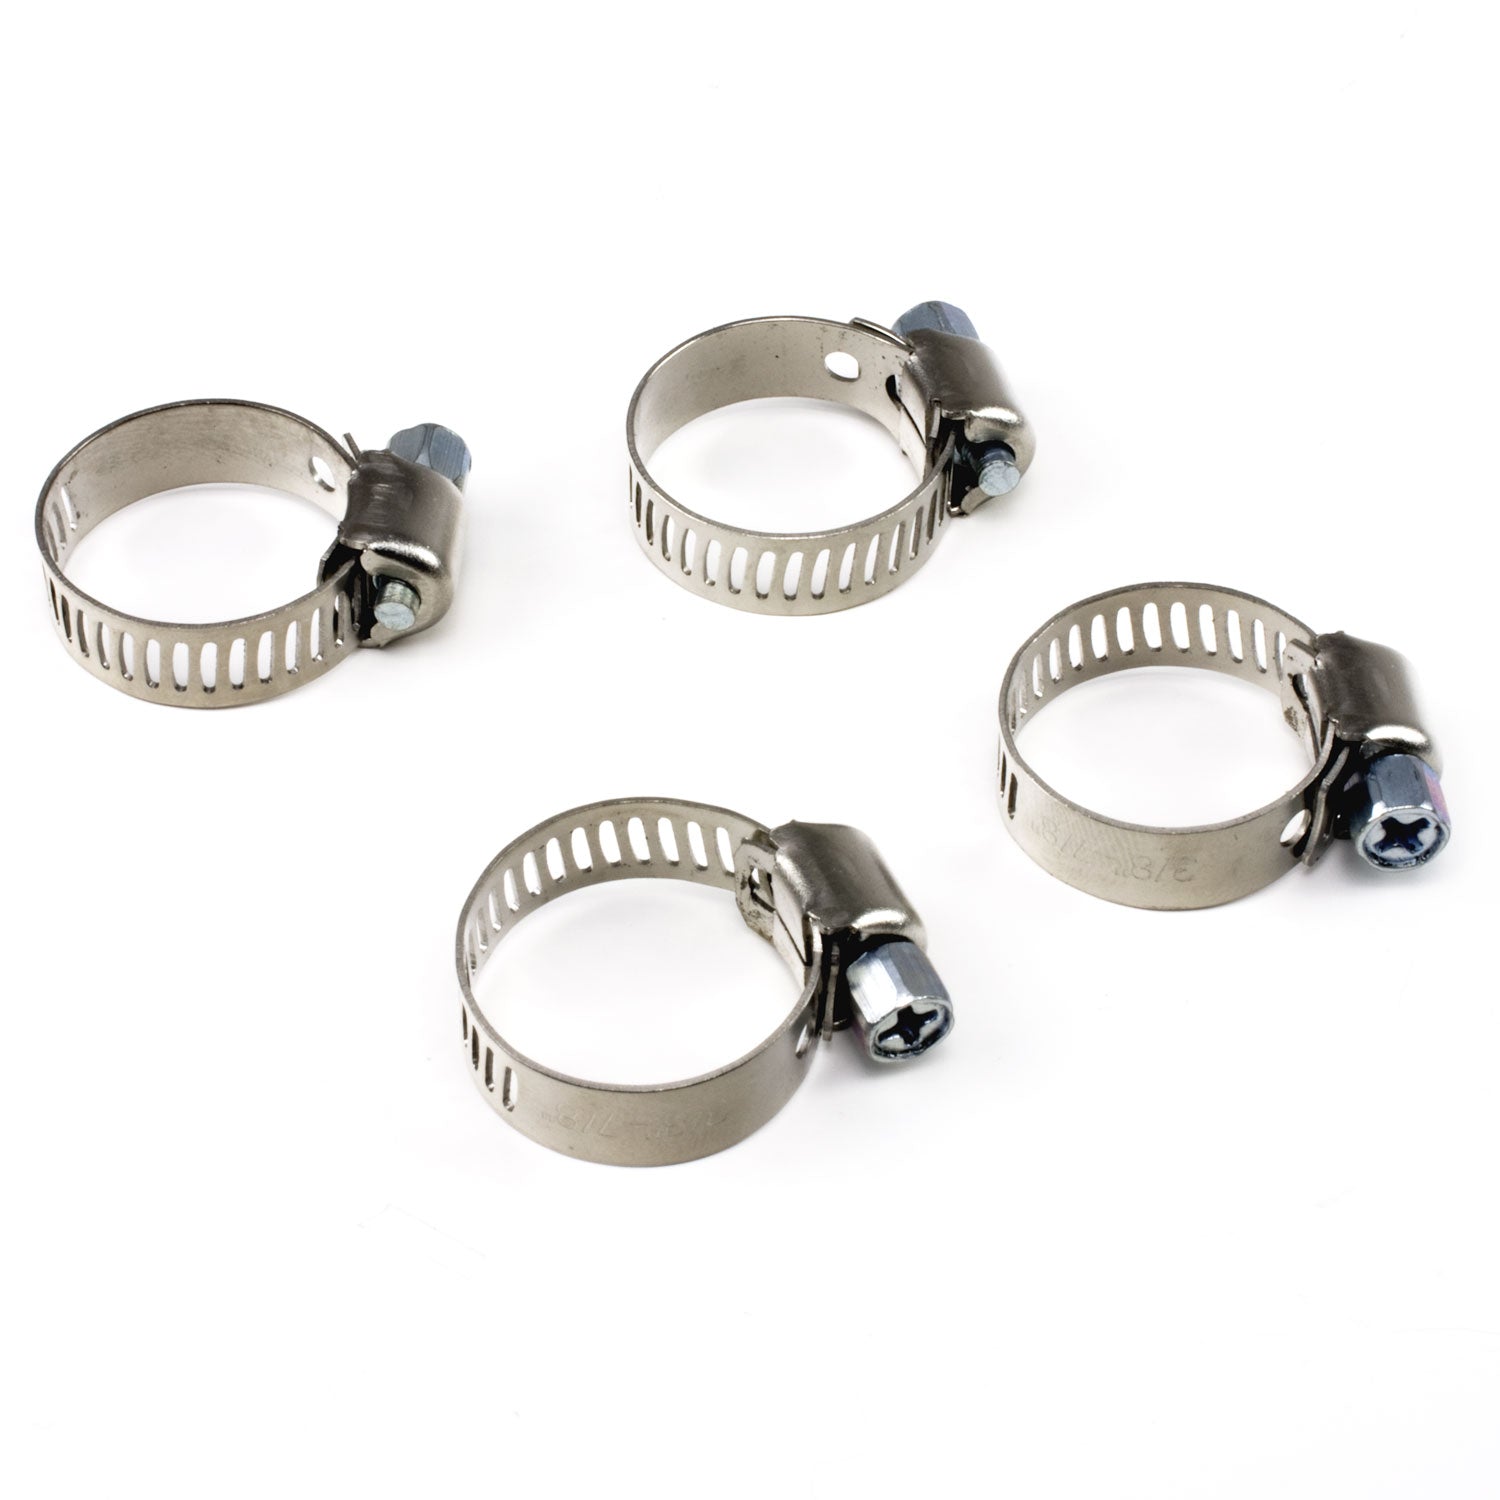 Hot Tub Hose Clamps for Vinyl Tubing - 4 pack - Stainless Steel ...